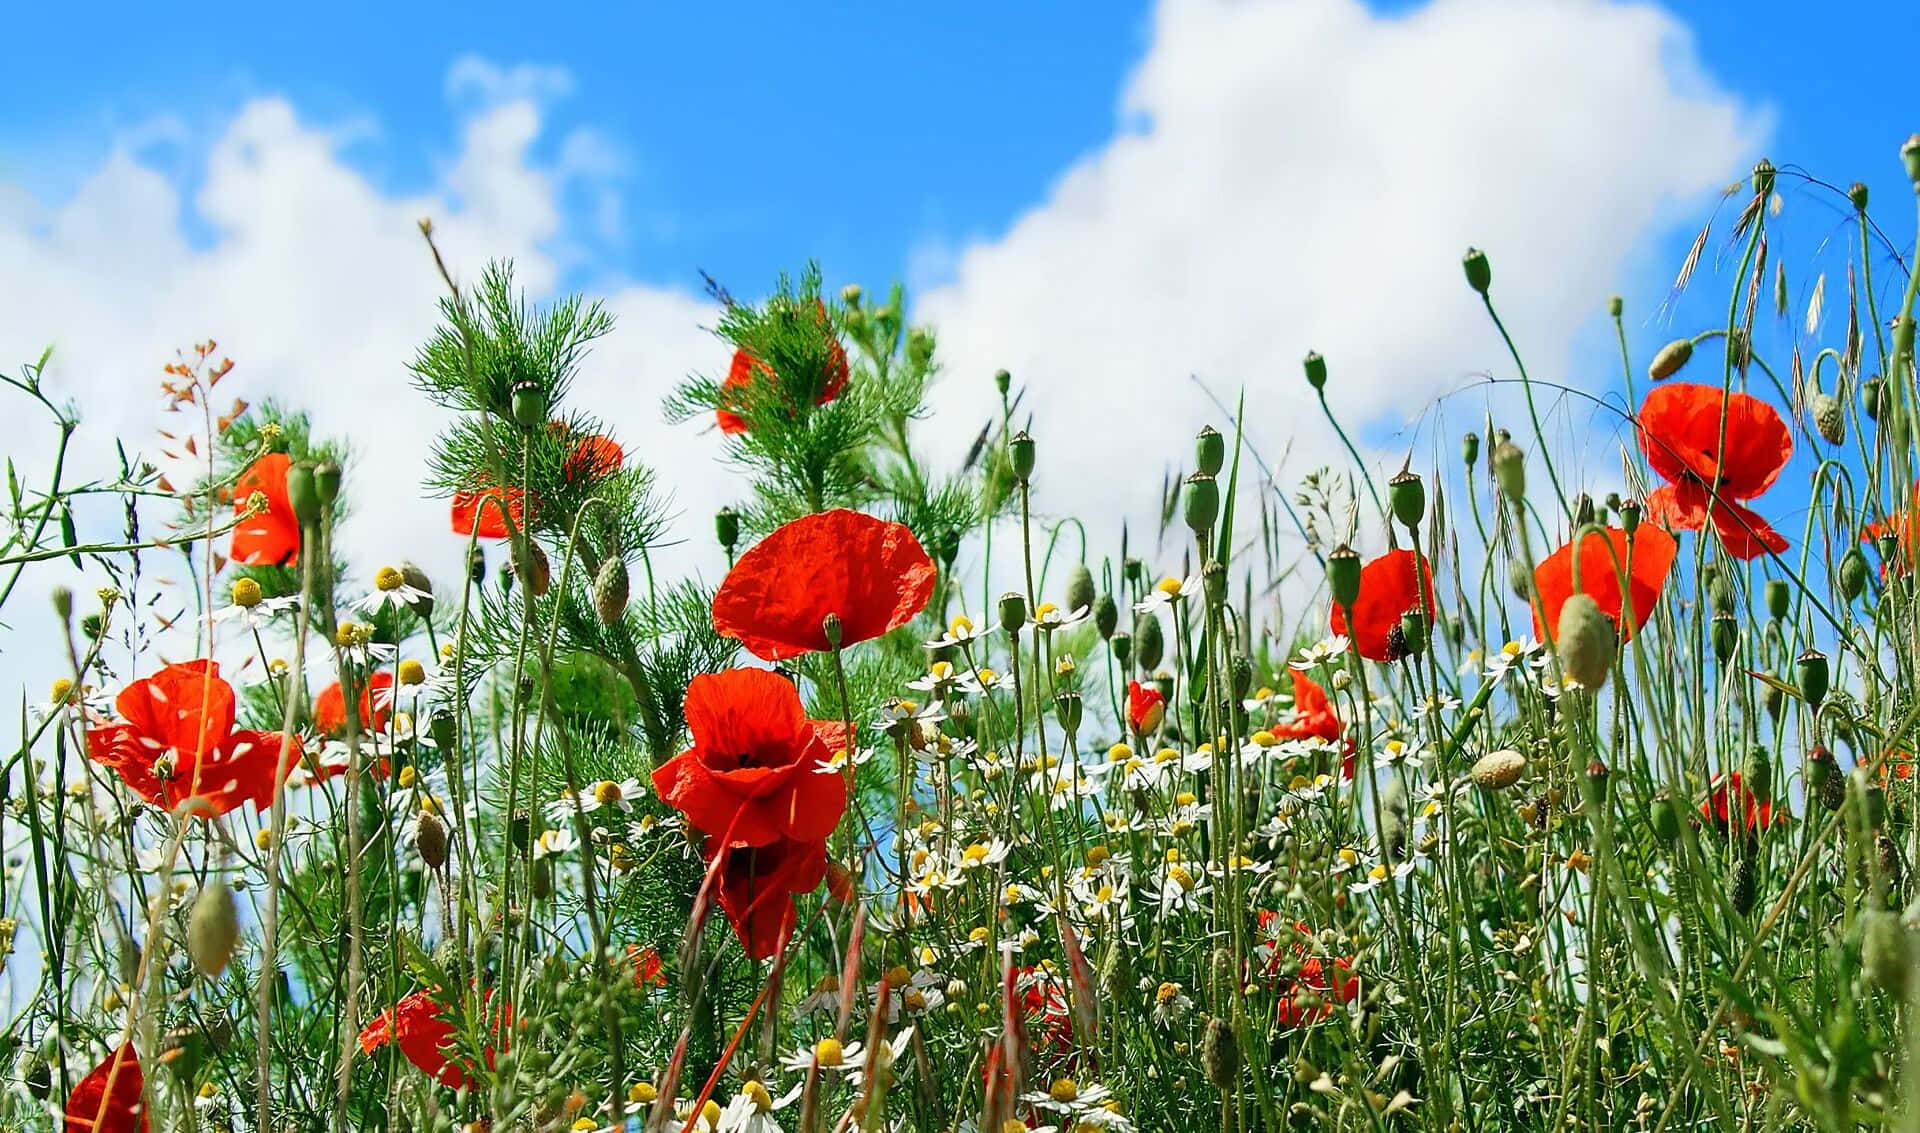 Colorful Poppy Flowers Waving in the Wind